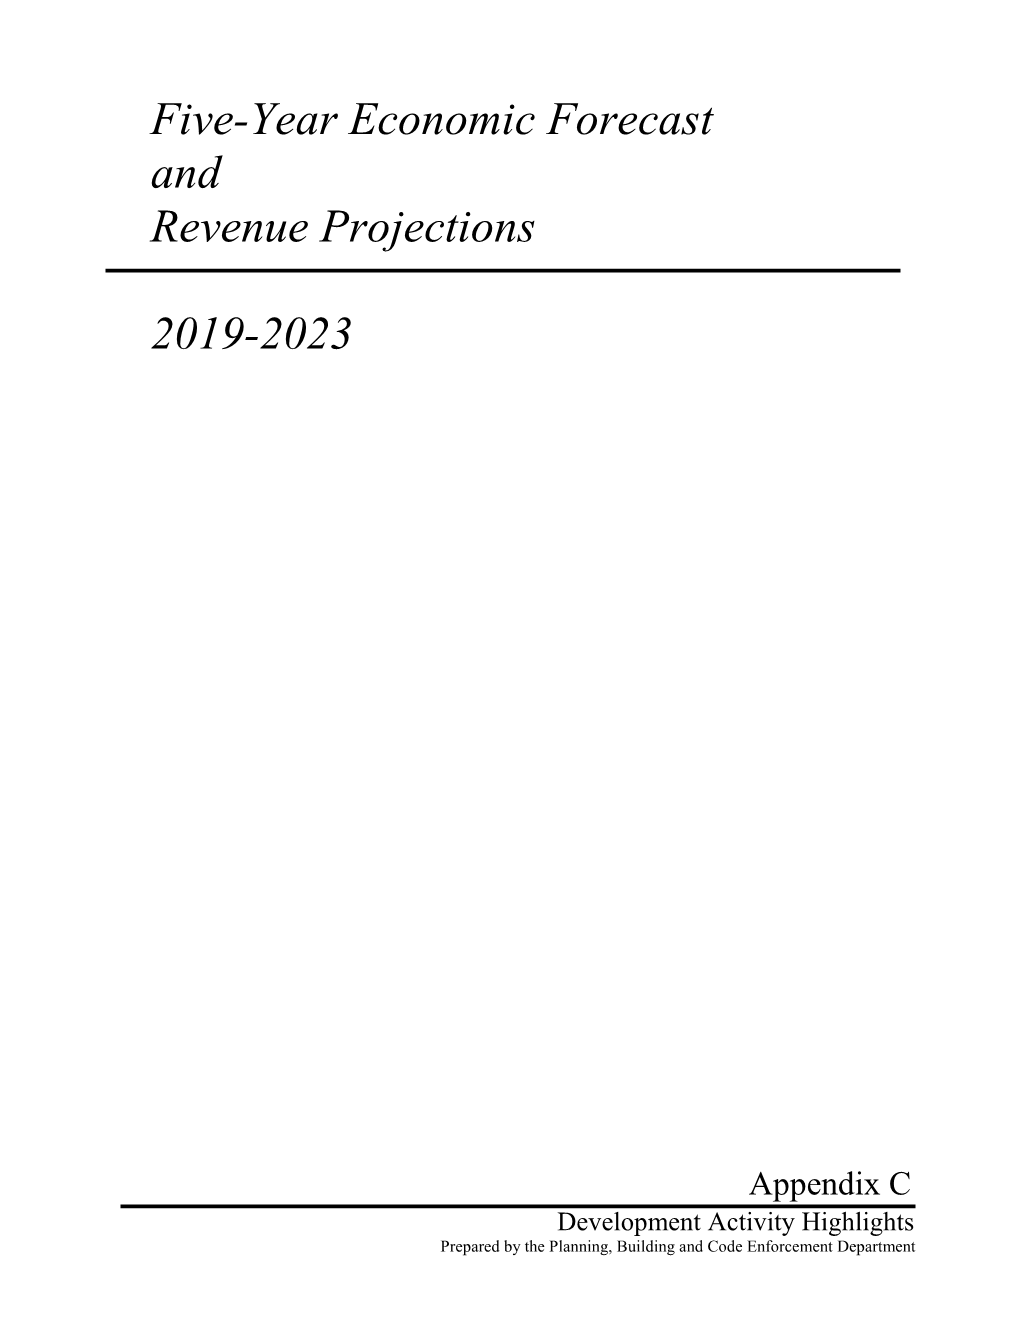 Five-Year Economic Forecast and Revenue Projections 2019-2023